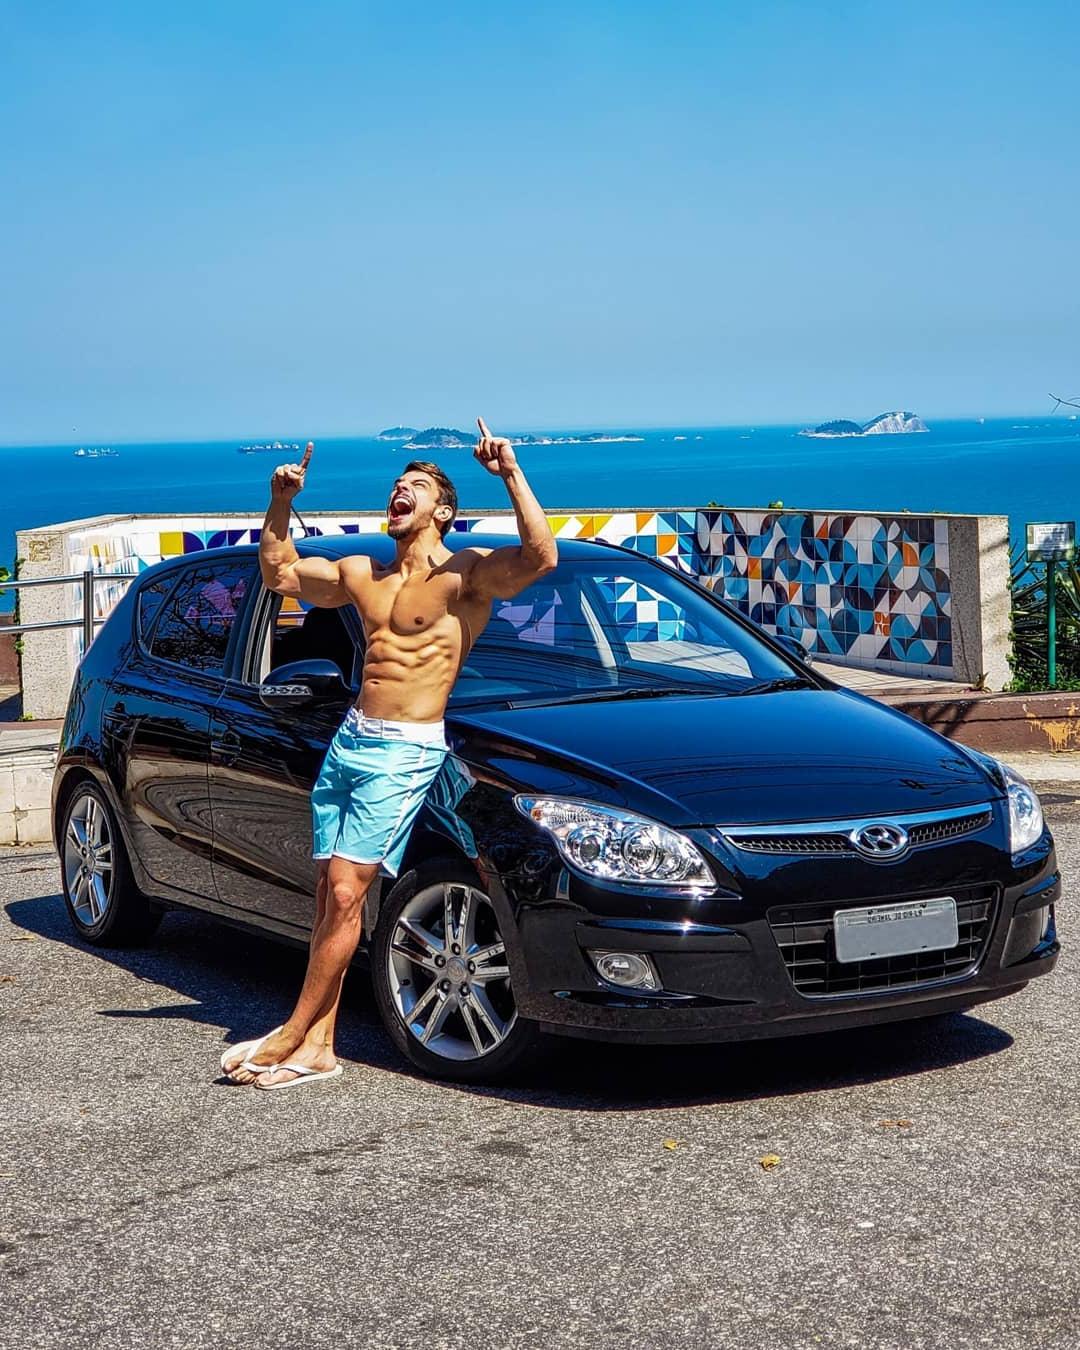 bare-chest-fit-guy-biceps-outdoor-vacation-car